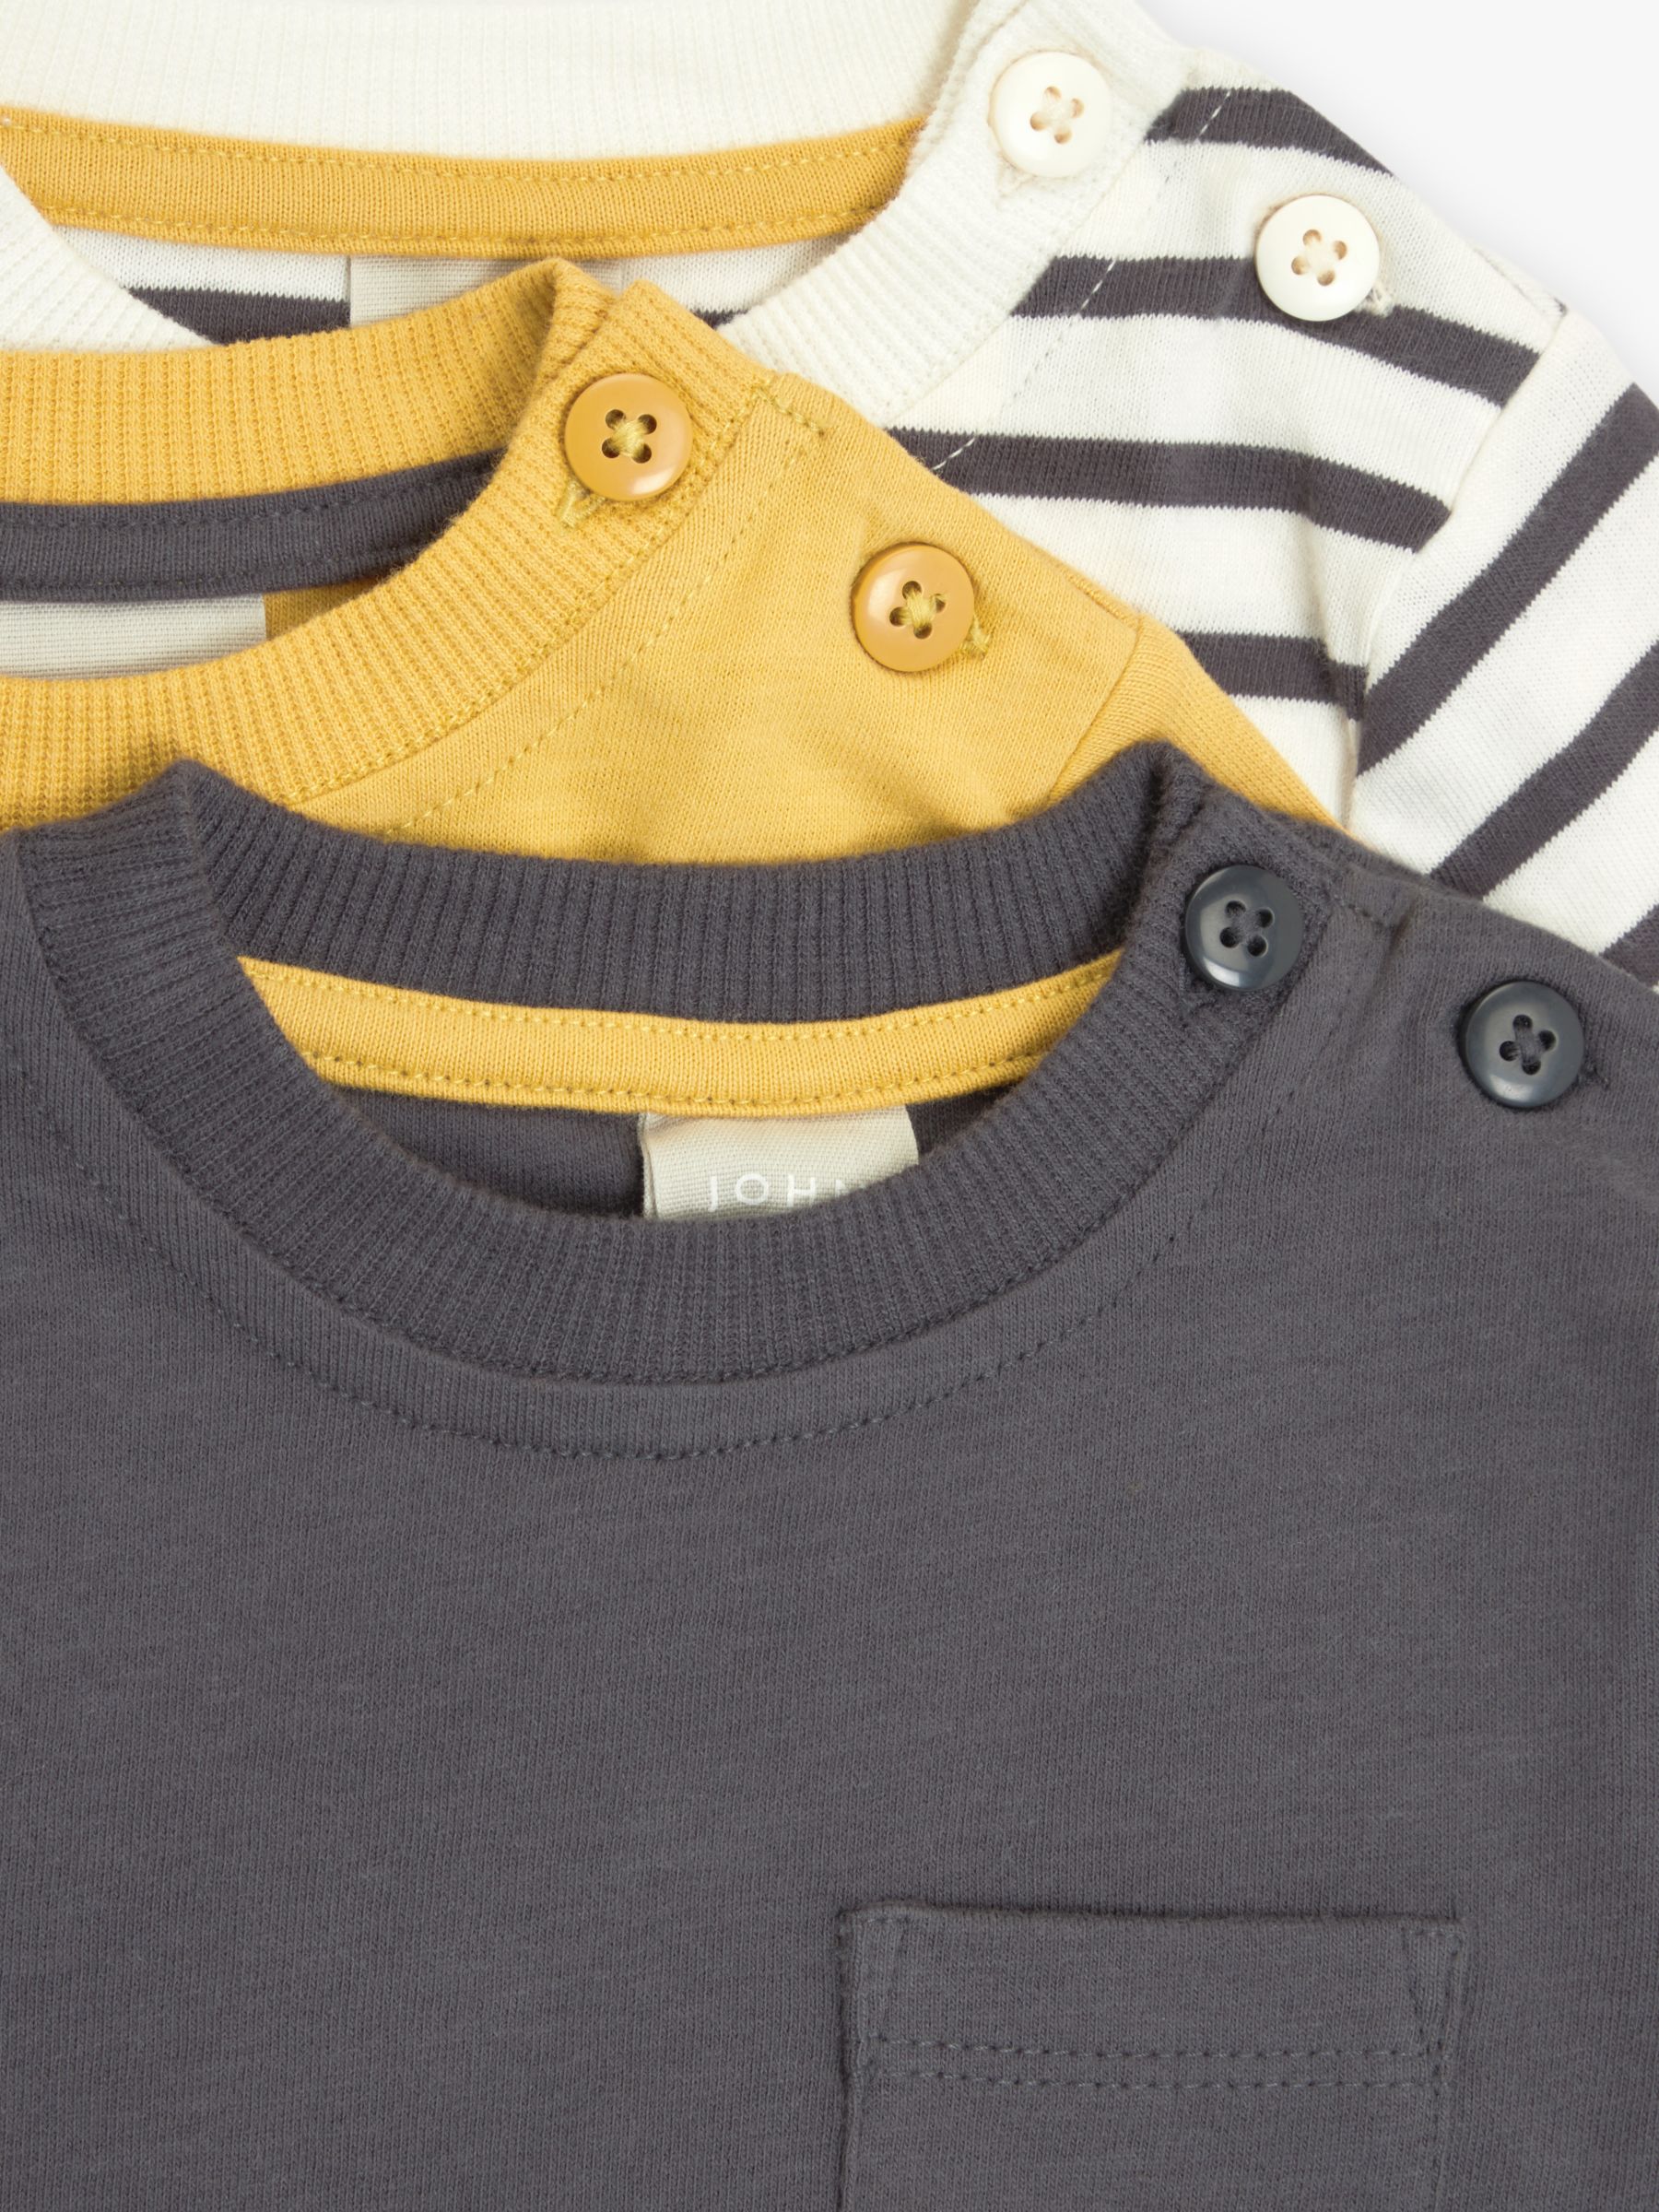 John Lewis Baby Stripe & Solid Long Sleeve T-Shirt, Pack of 3, Multi, 3-6 months